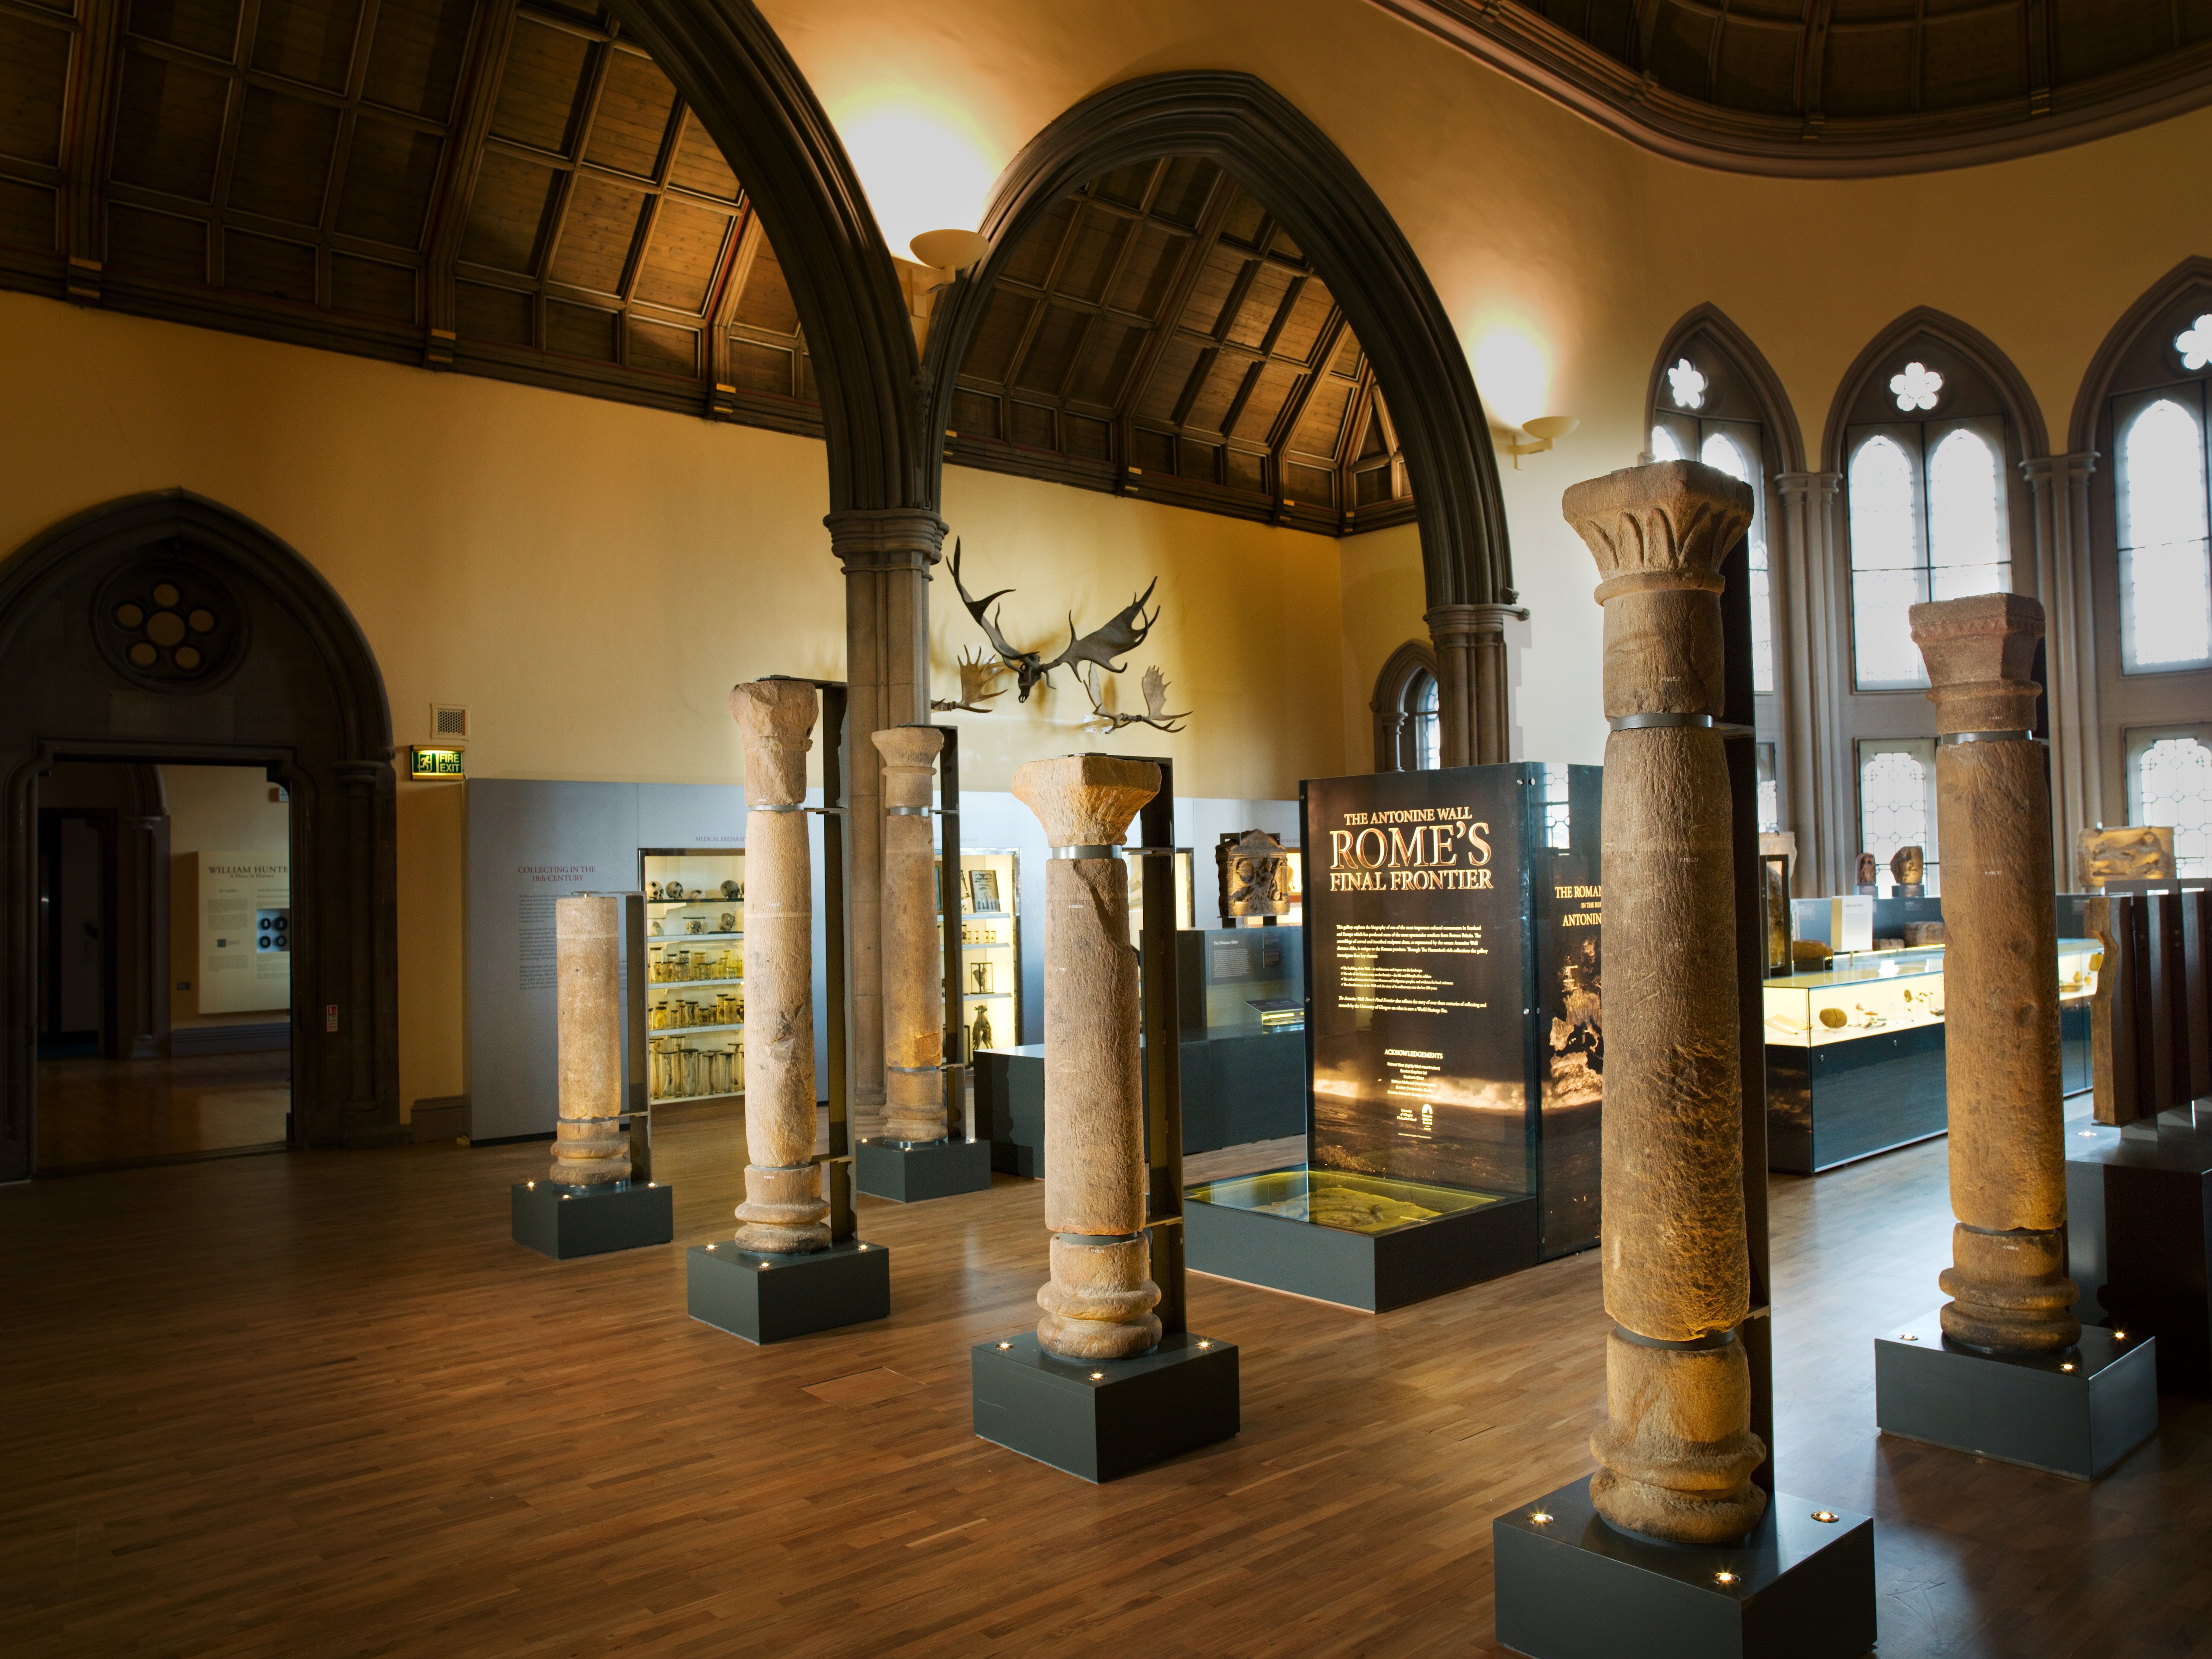 Image of the exhibition 'The Antonine Wall: Rome's Final Frontier' at the Hunterian Museum.